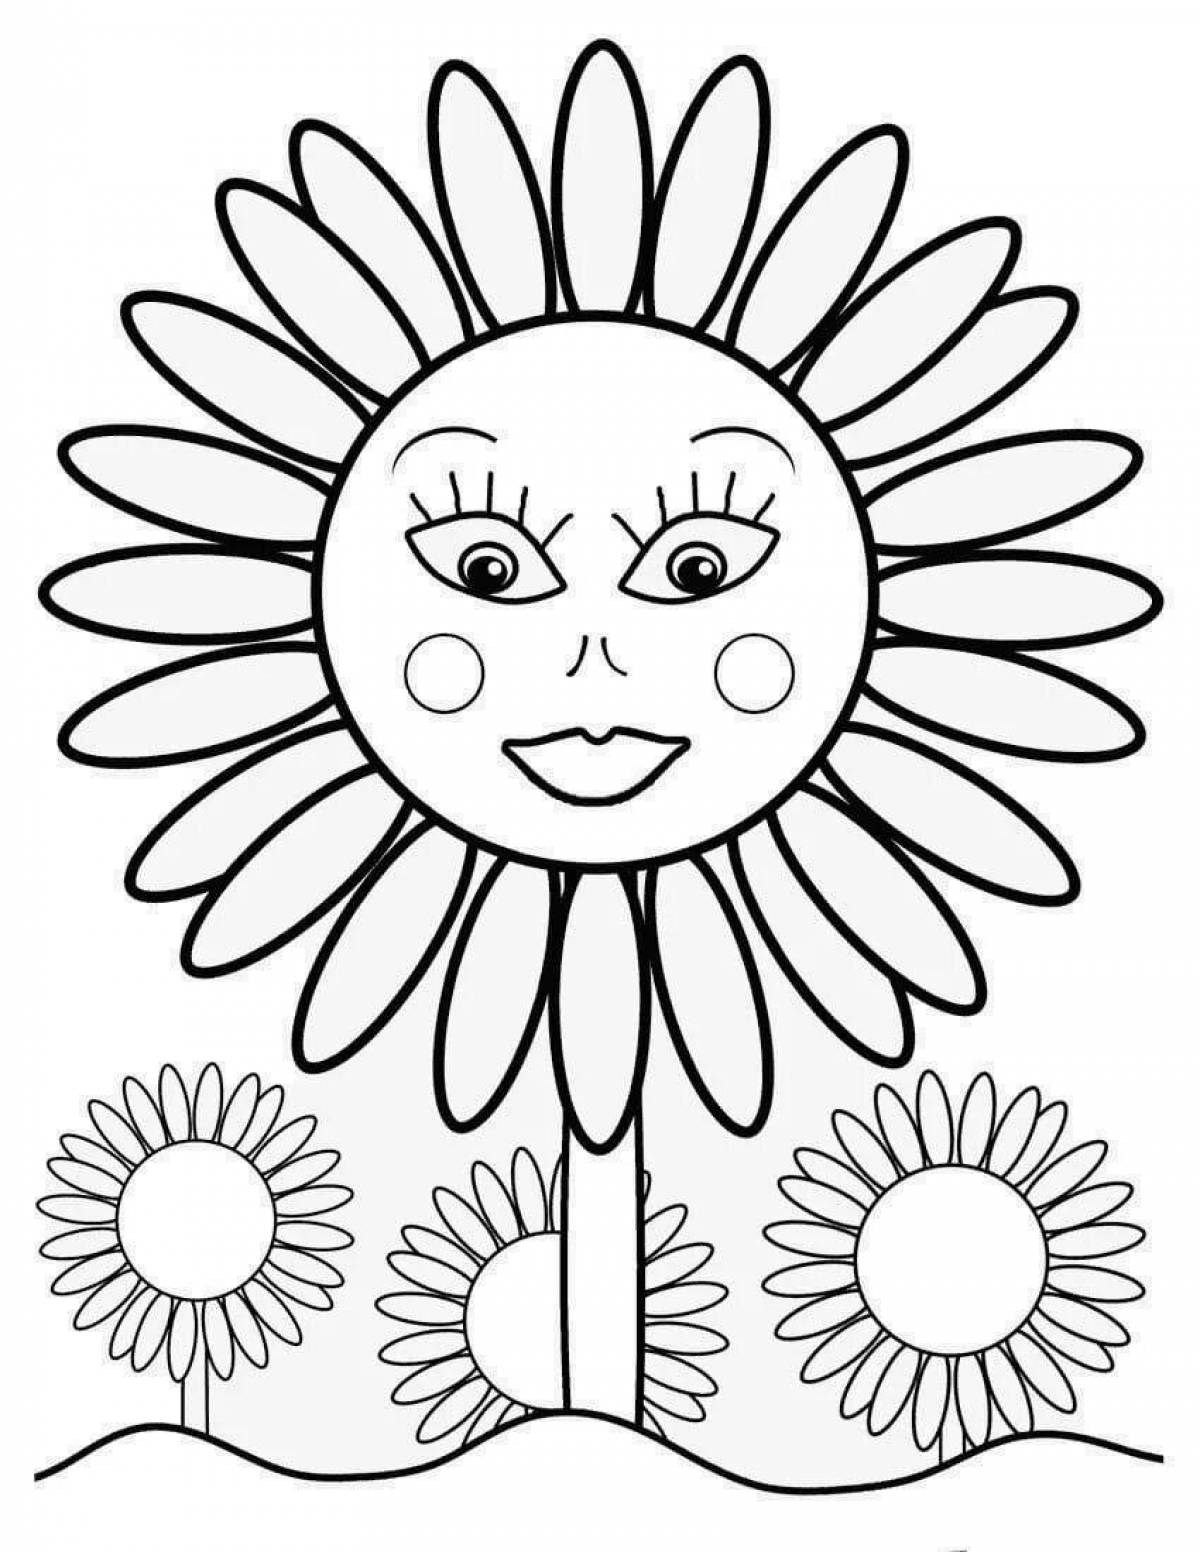 Coloring page exciting carnival sun